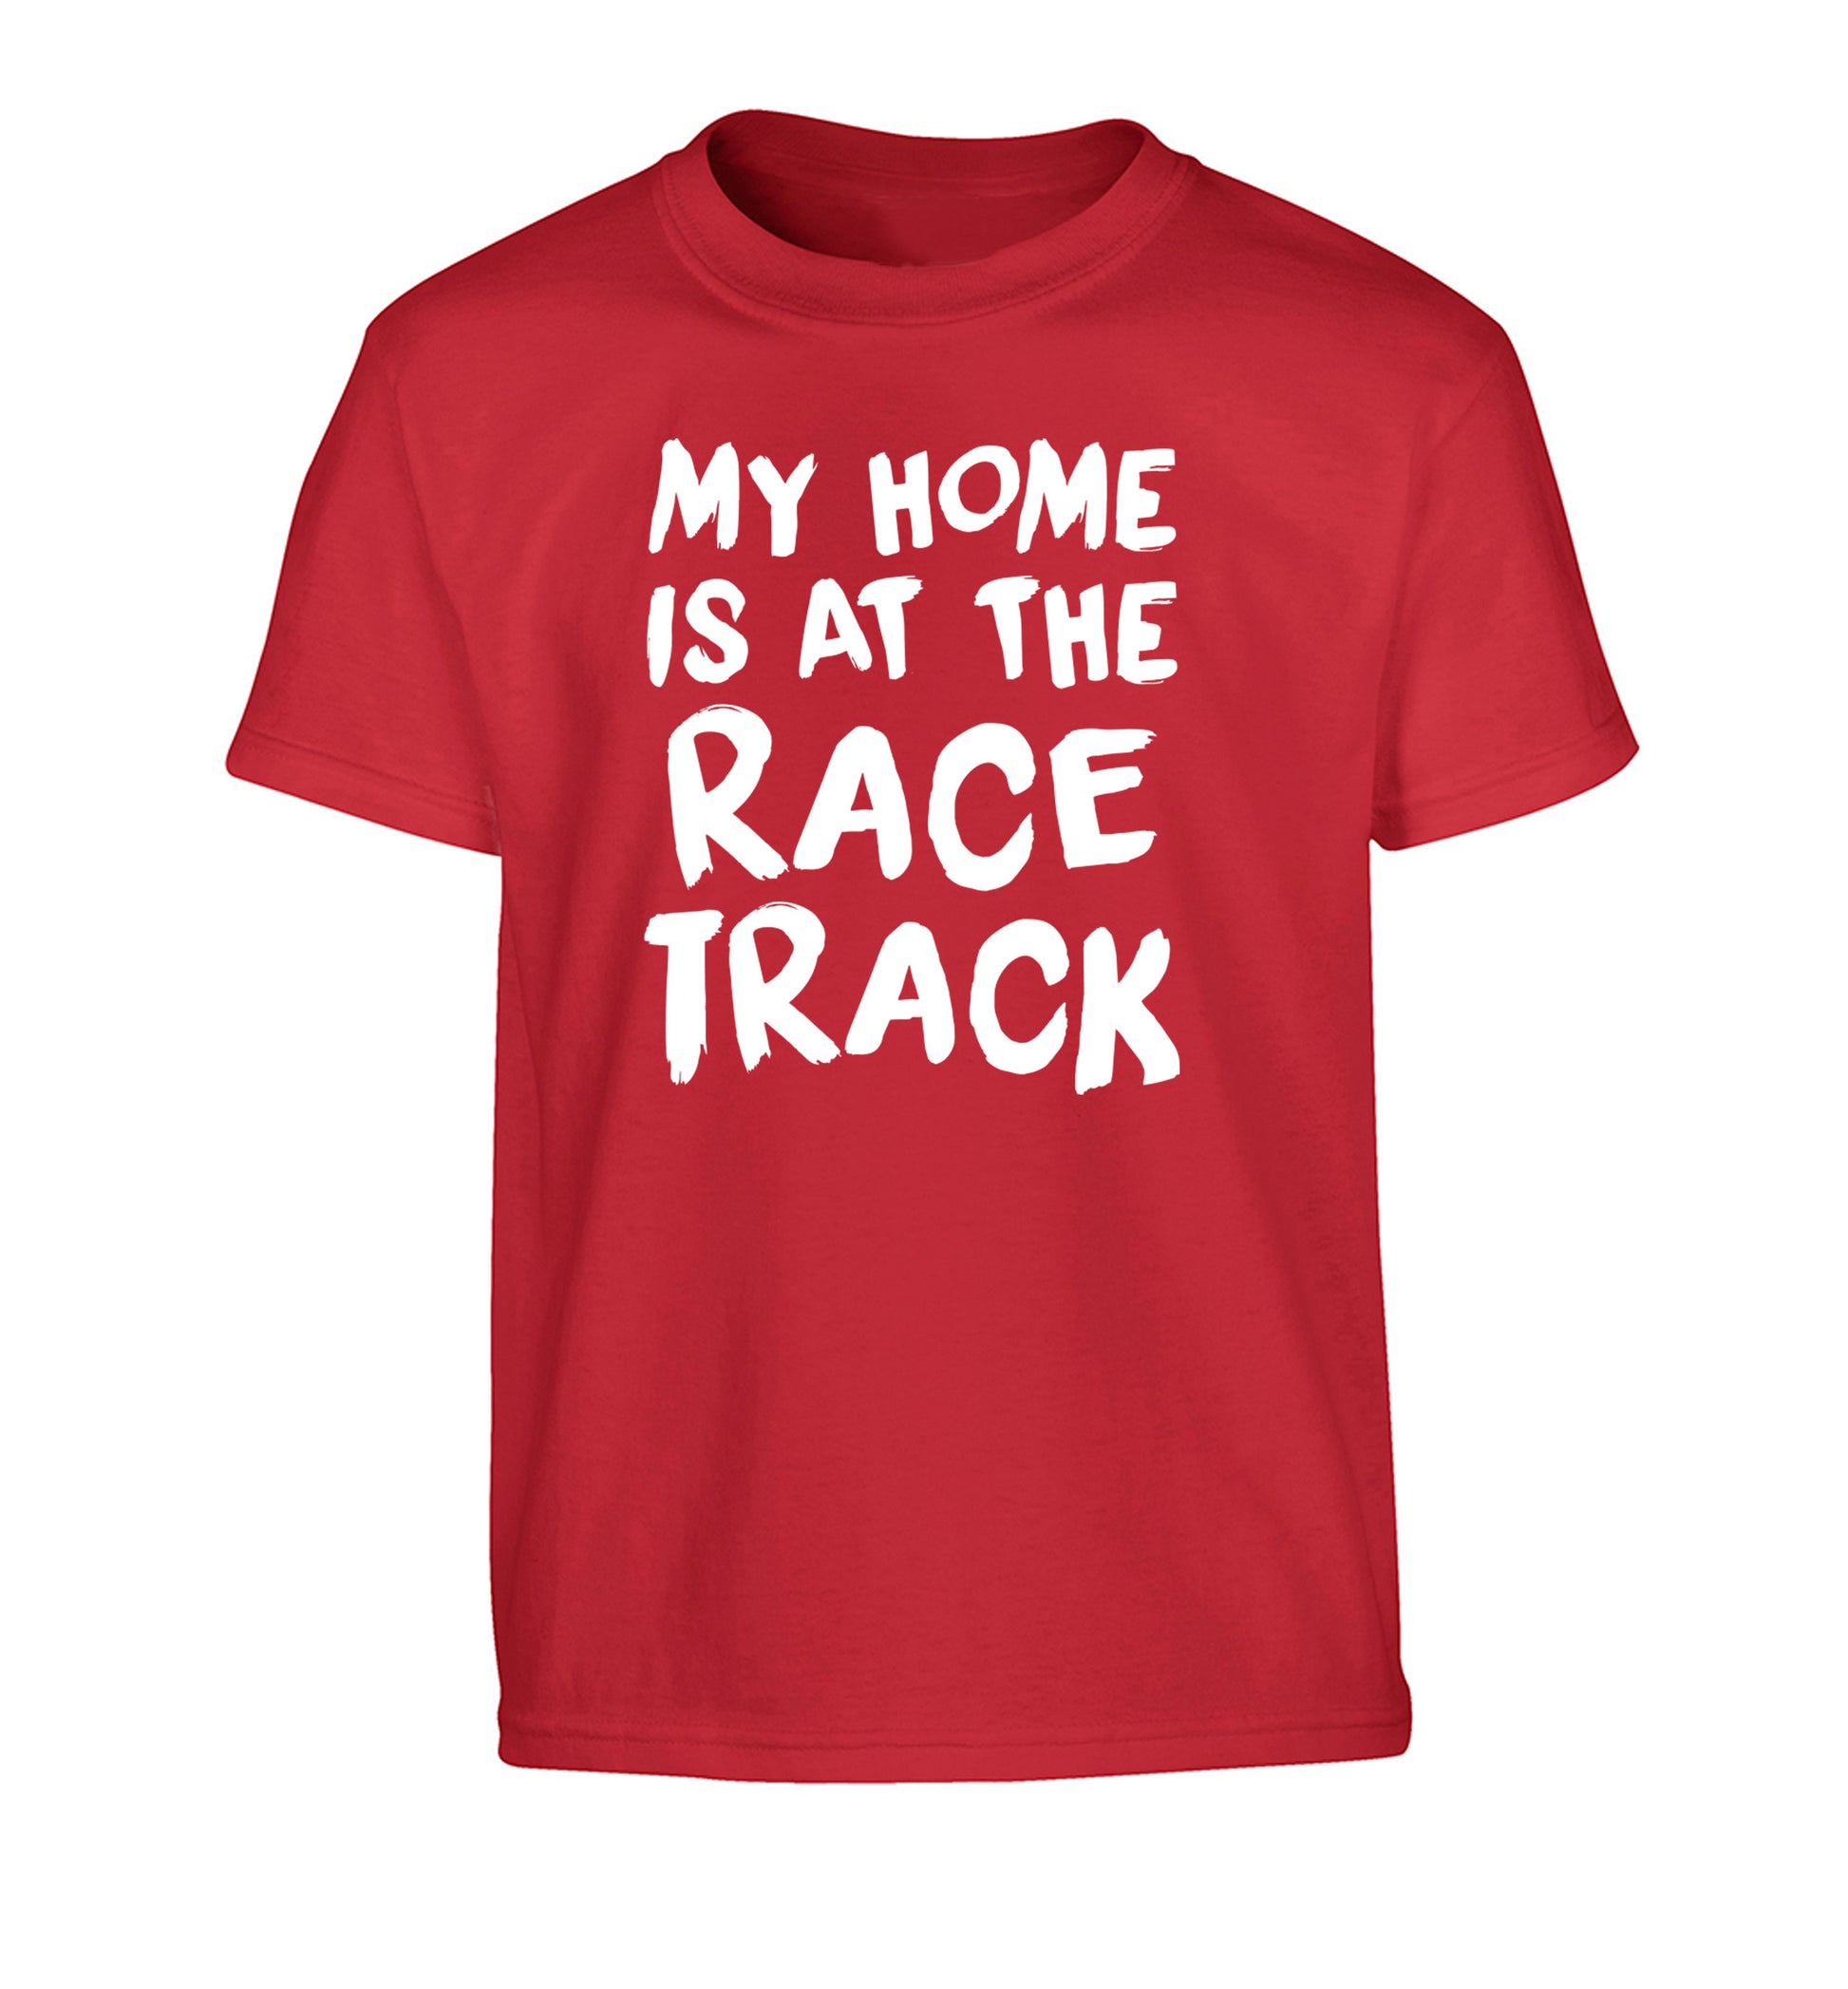 My home is at the race track Children's red Tshirt 12-14 Years